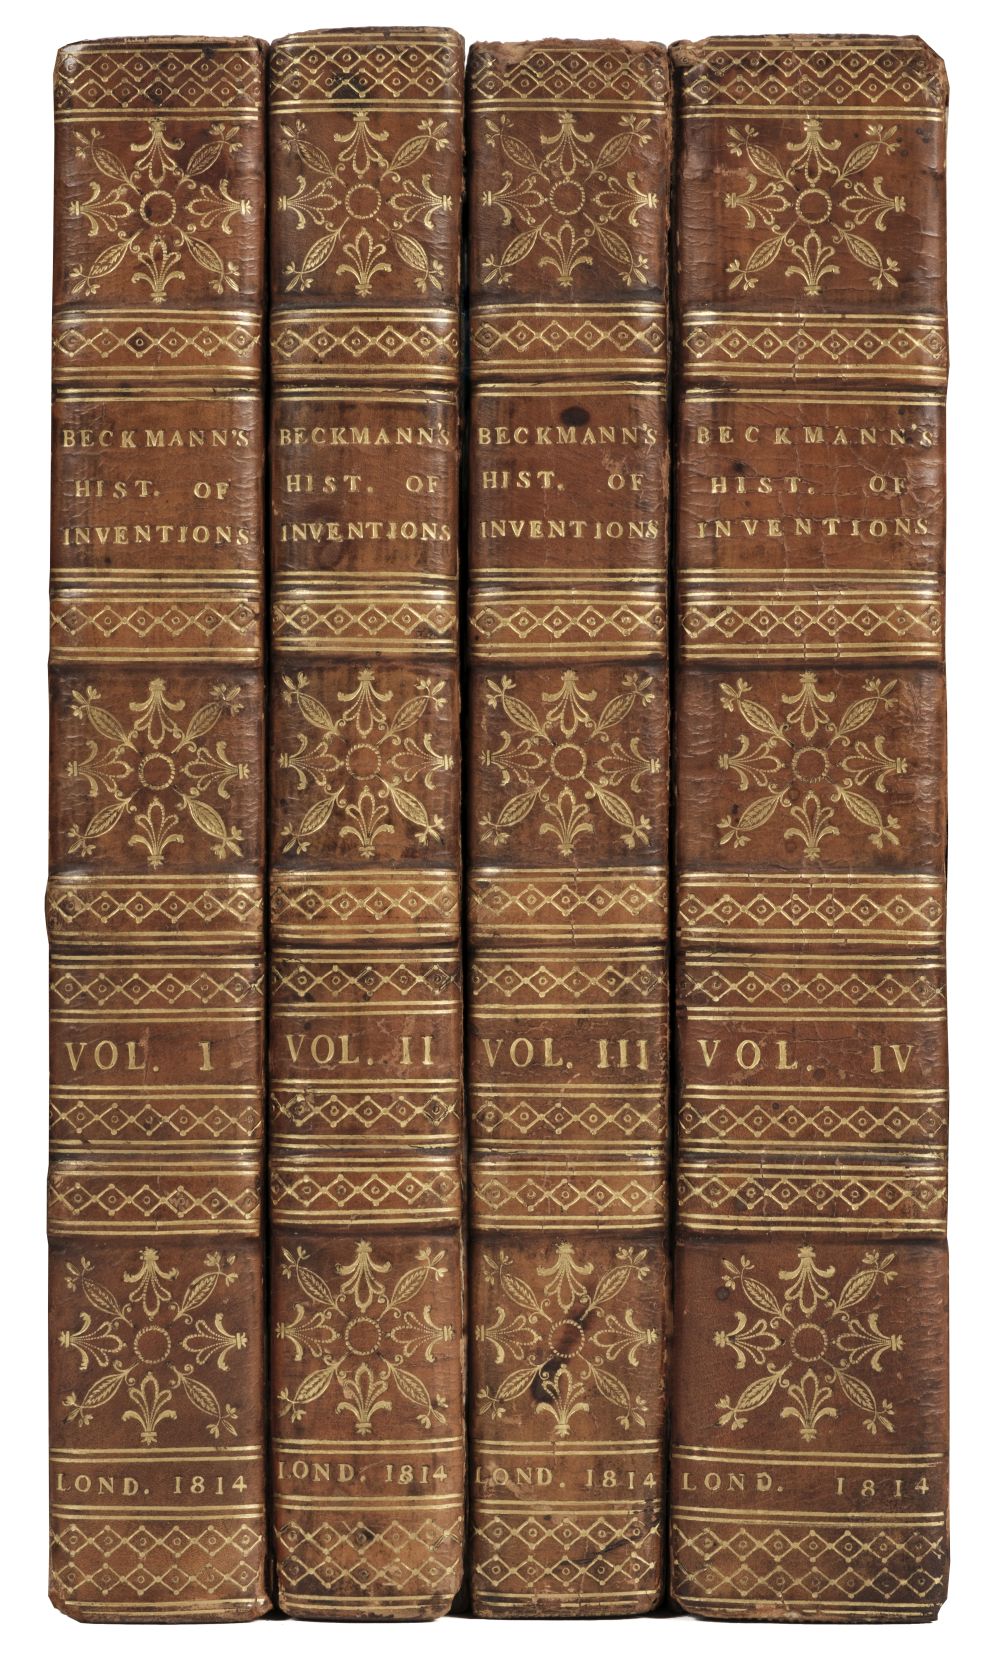 Beckman (John). A History of Inventions and Discoveries, 4 volumes, 2nd edition, 1814